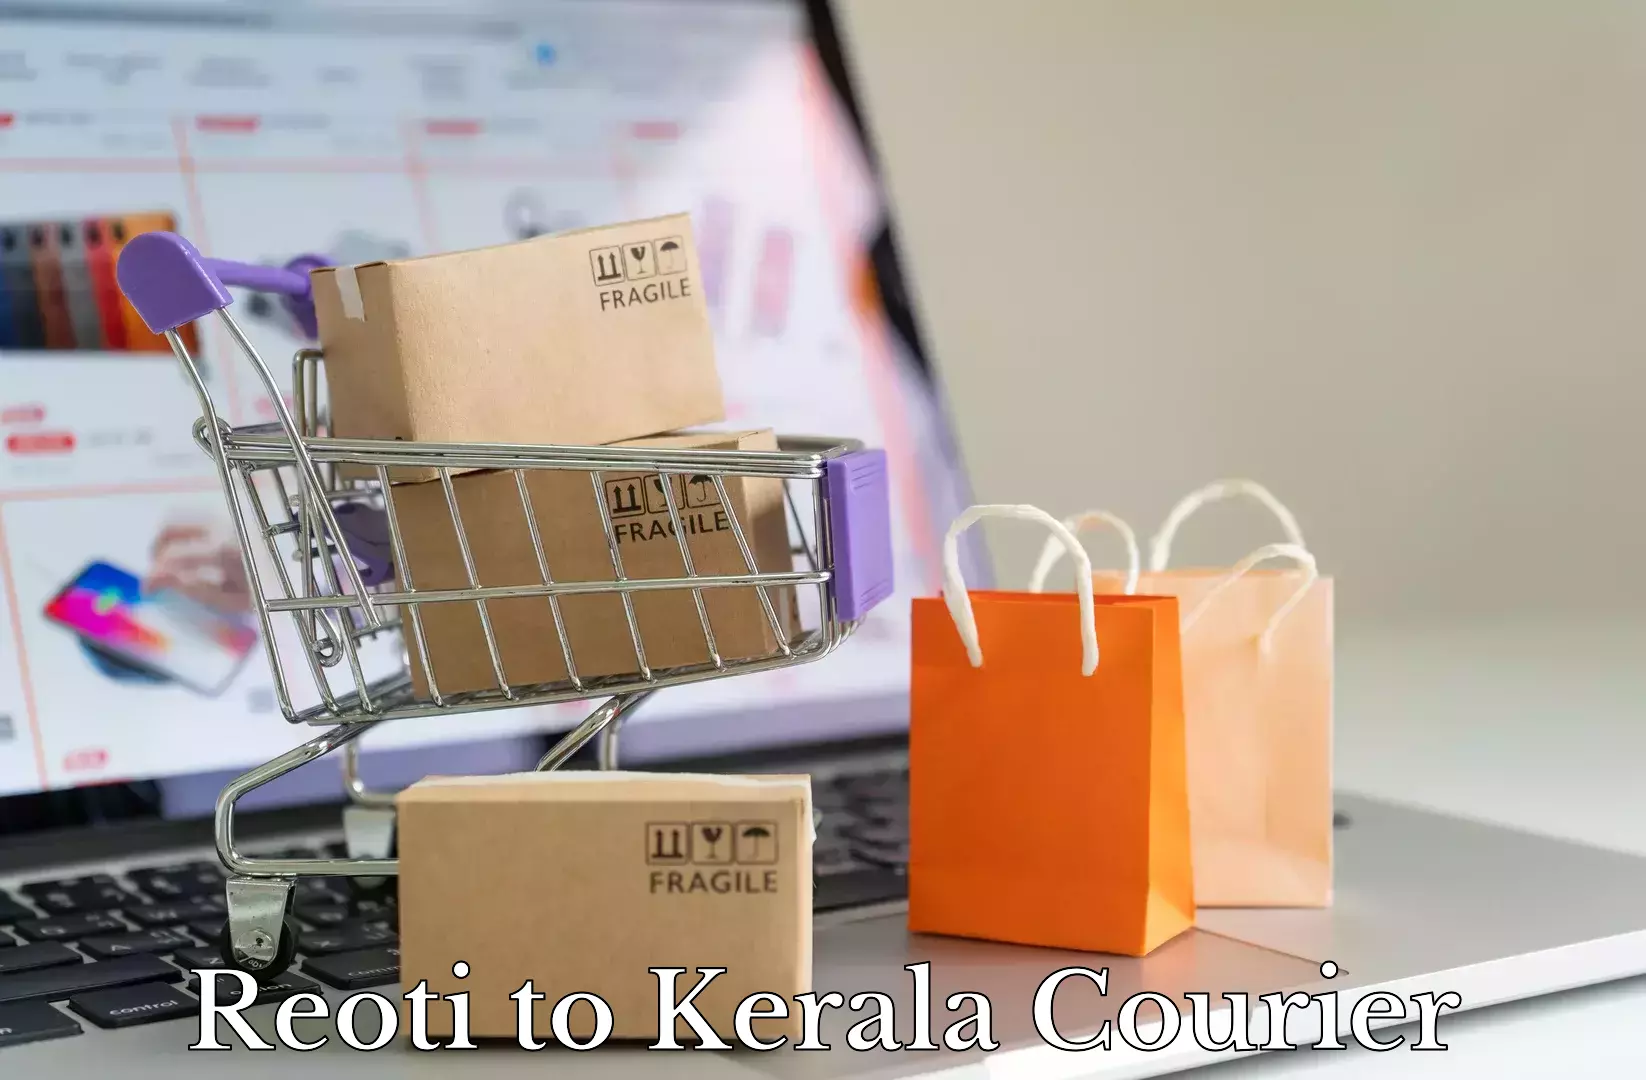 Full home relocation services Reoti to Kerala